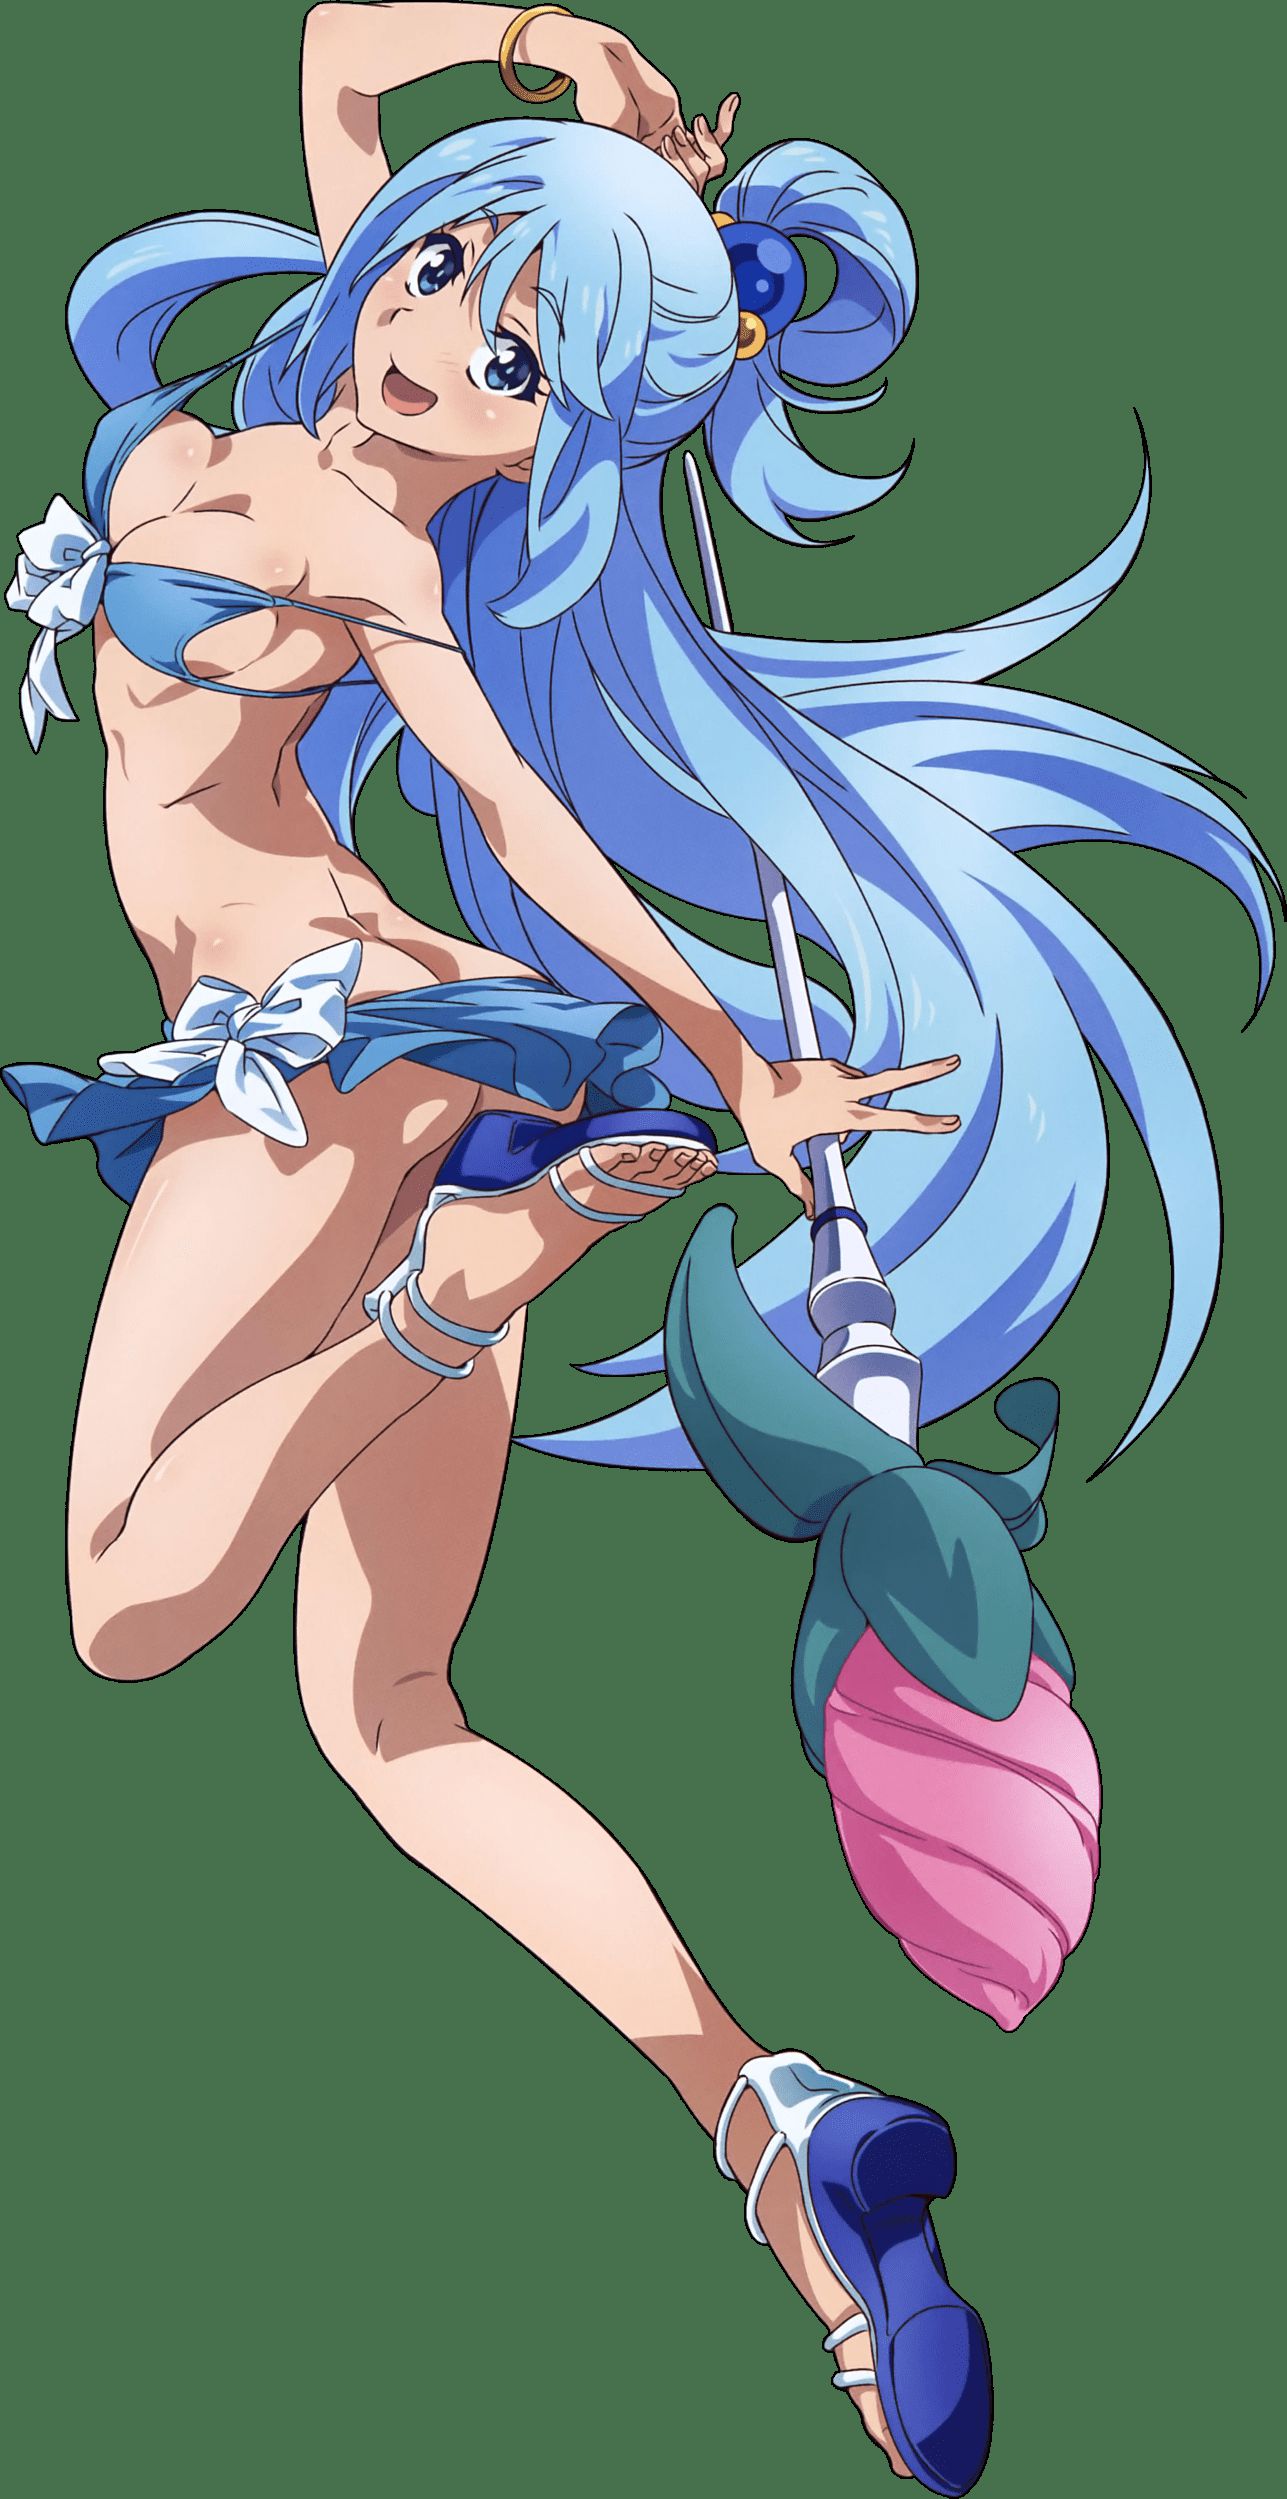 [Anime character material] png background erotic images of anime characters 86 22